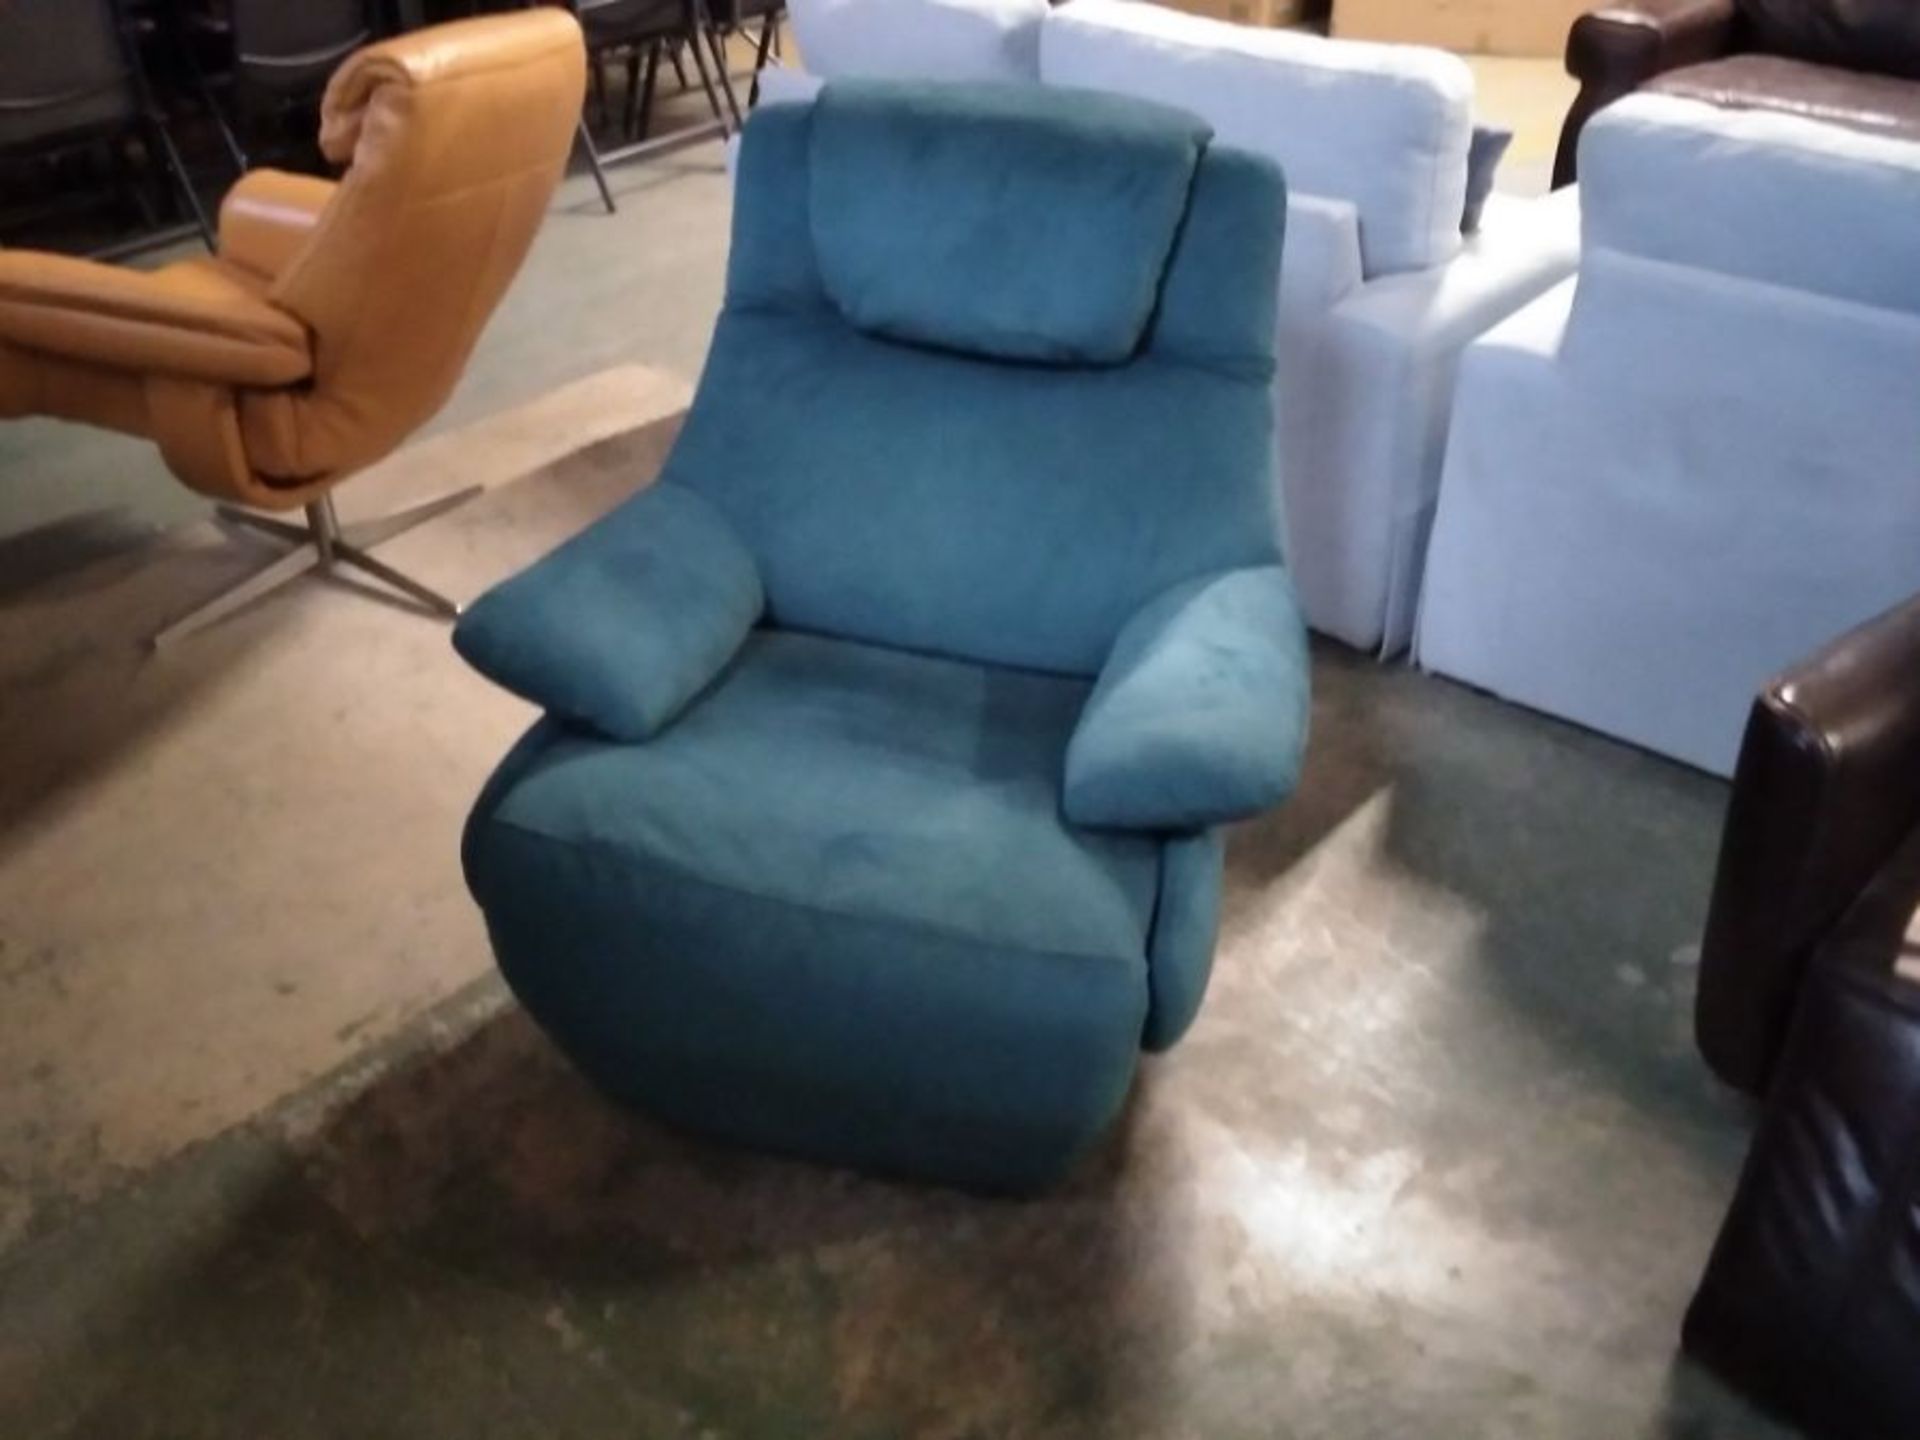 GREEN SWIVELLING CHAIR {FAULTY I/C}